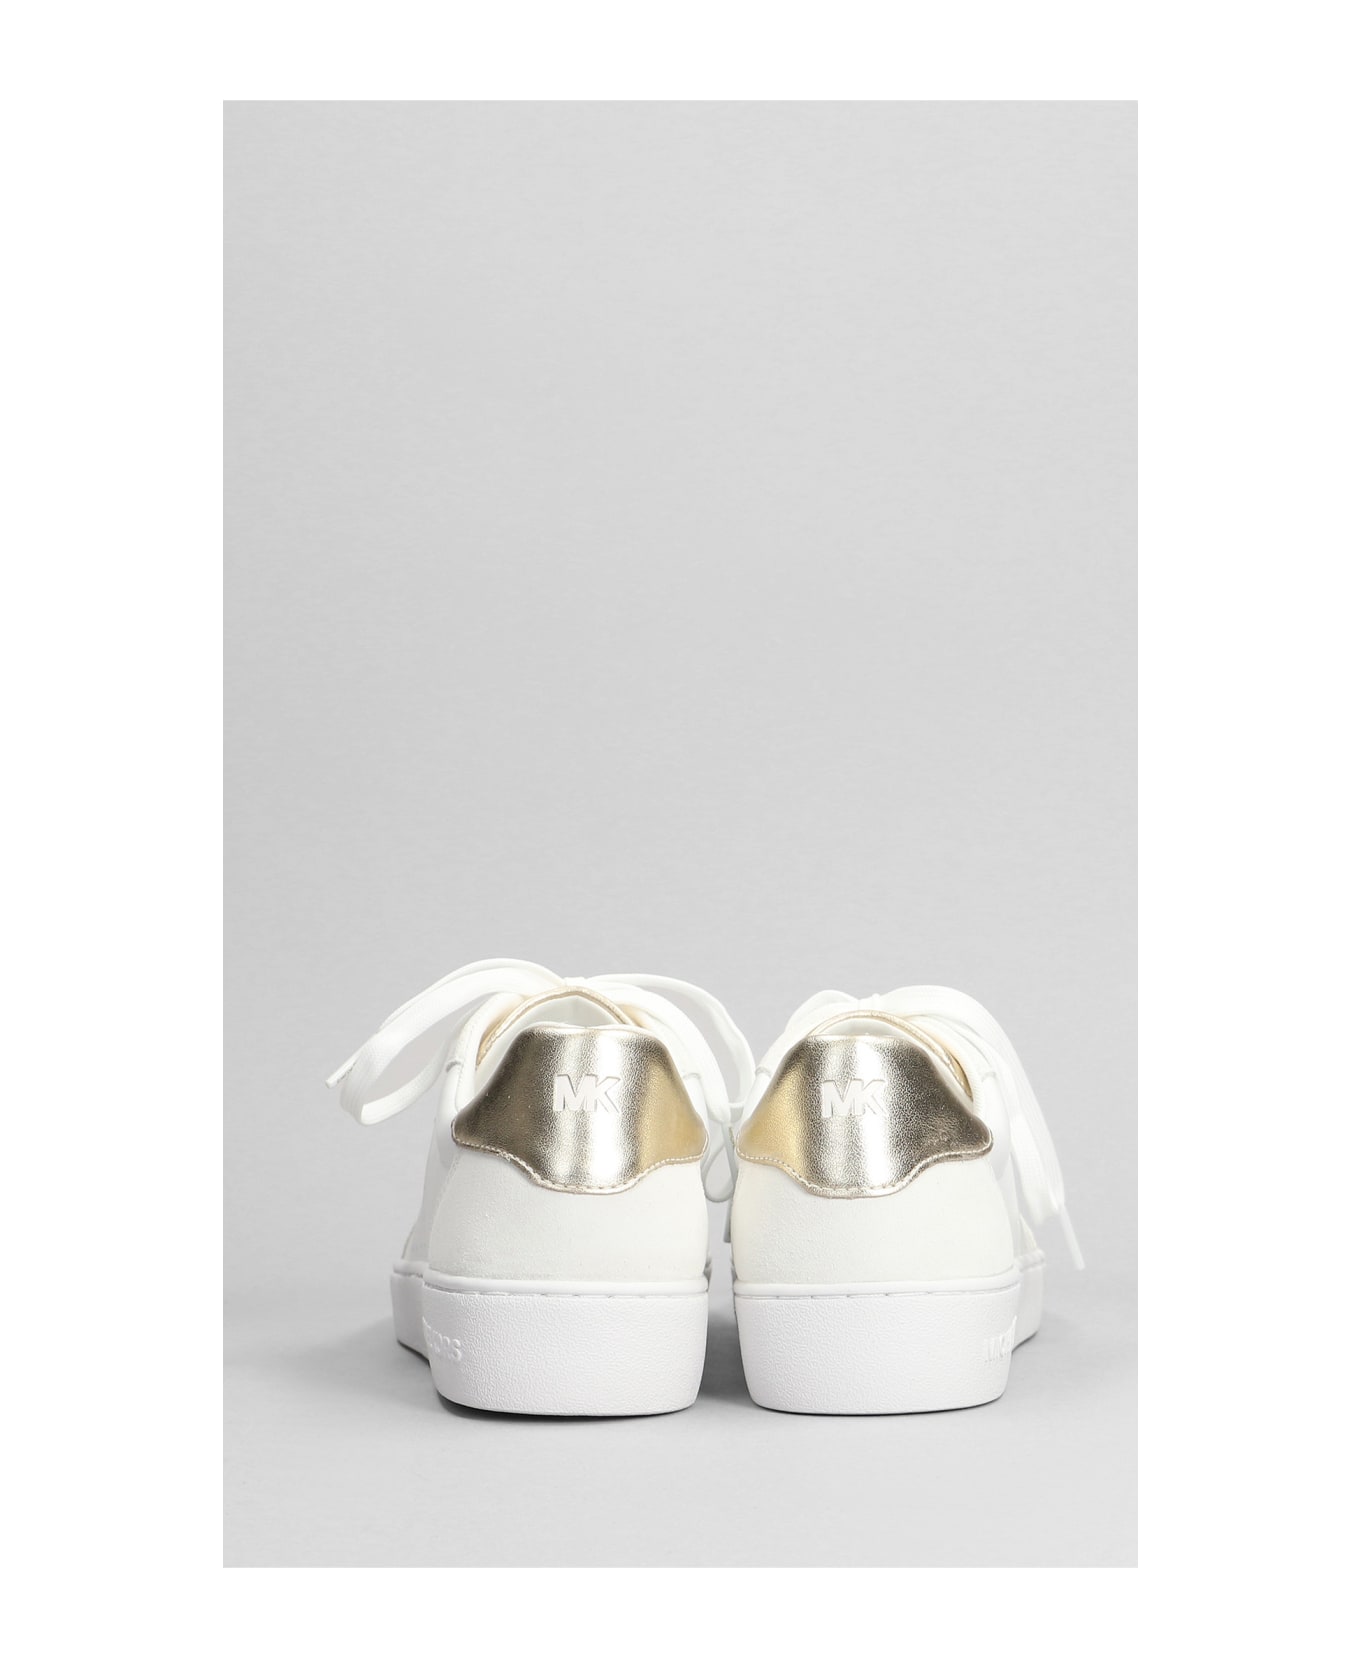 Michael Kors Scotty Sneakers In White Suede And Leather - Bianco